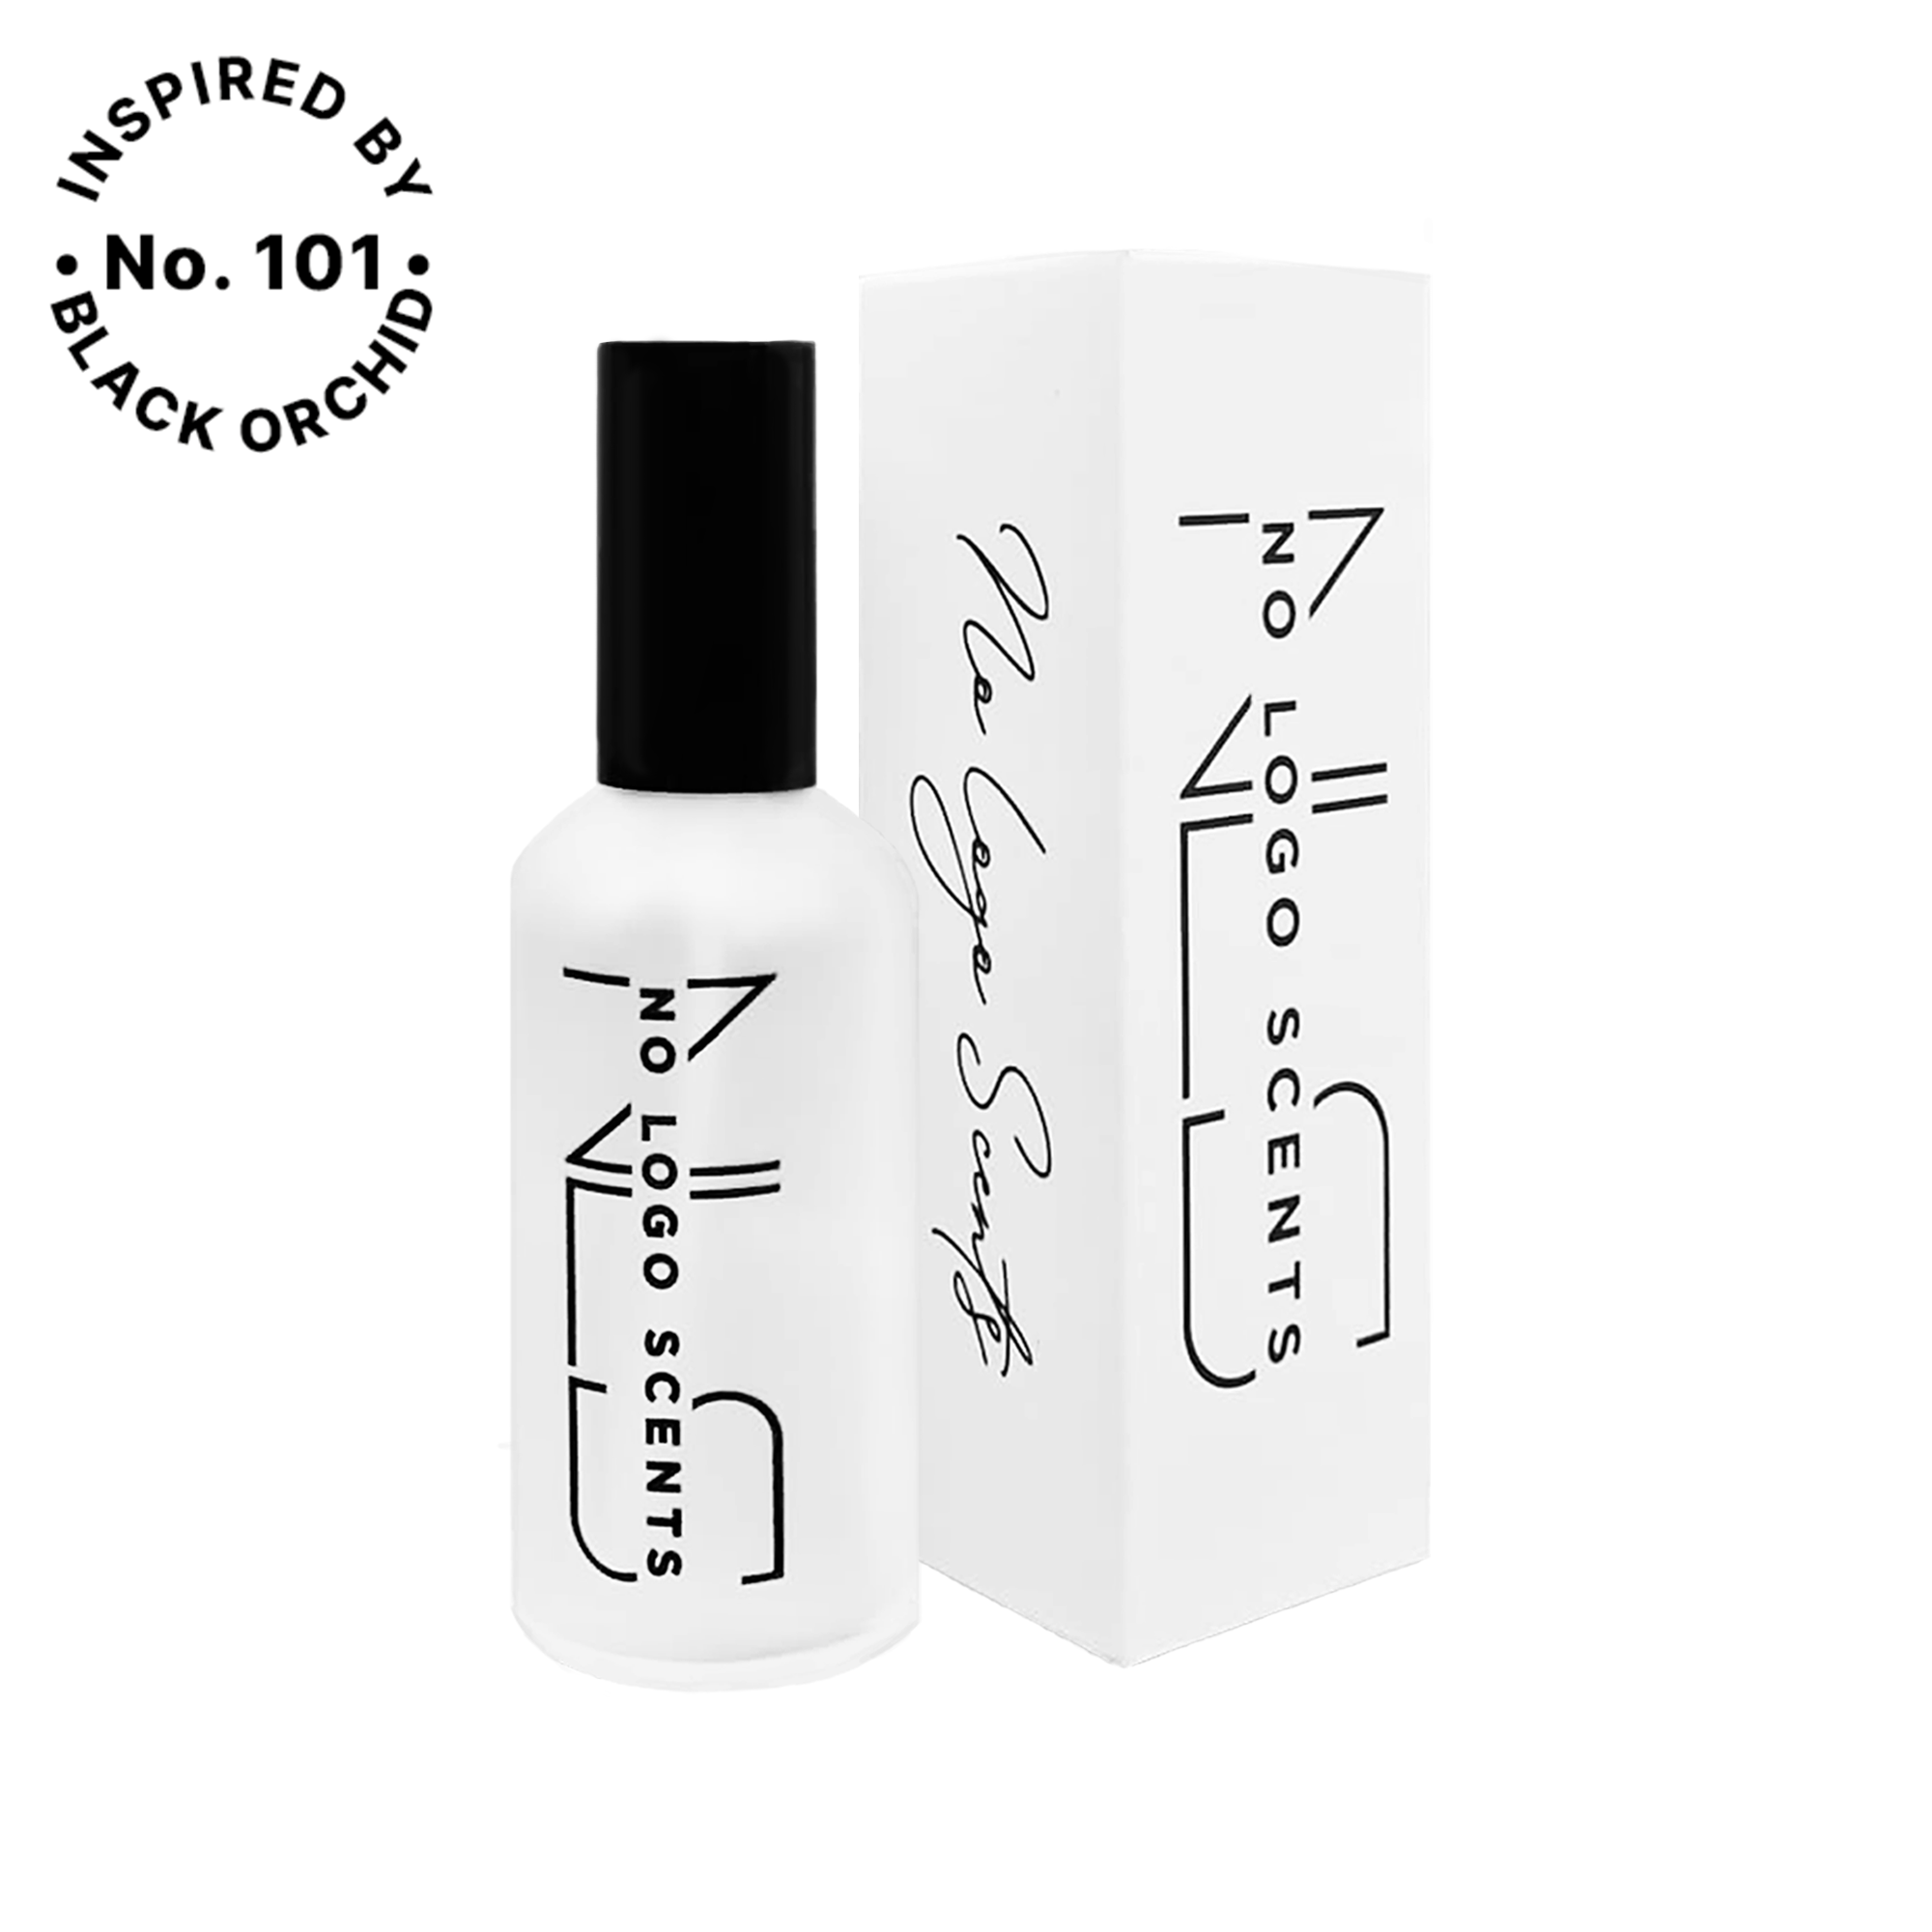 No.101 INSPIRED BY BLACK ORCHID from category UNISEX PERFUMES - 1